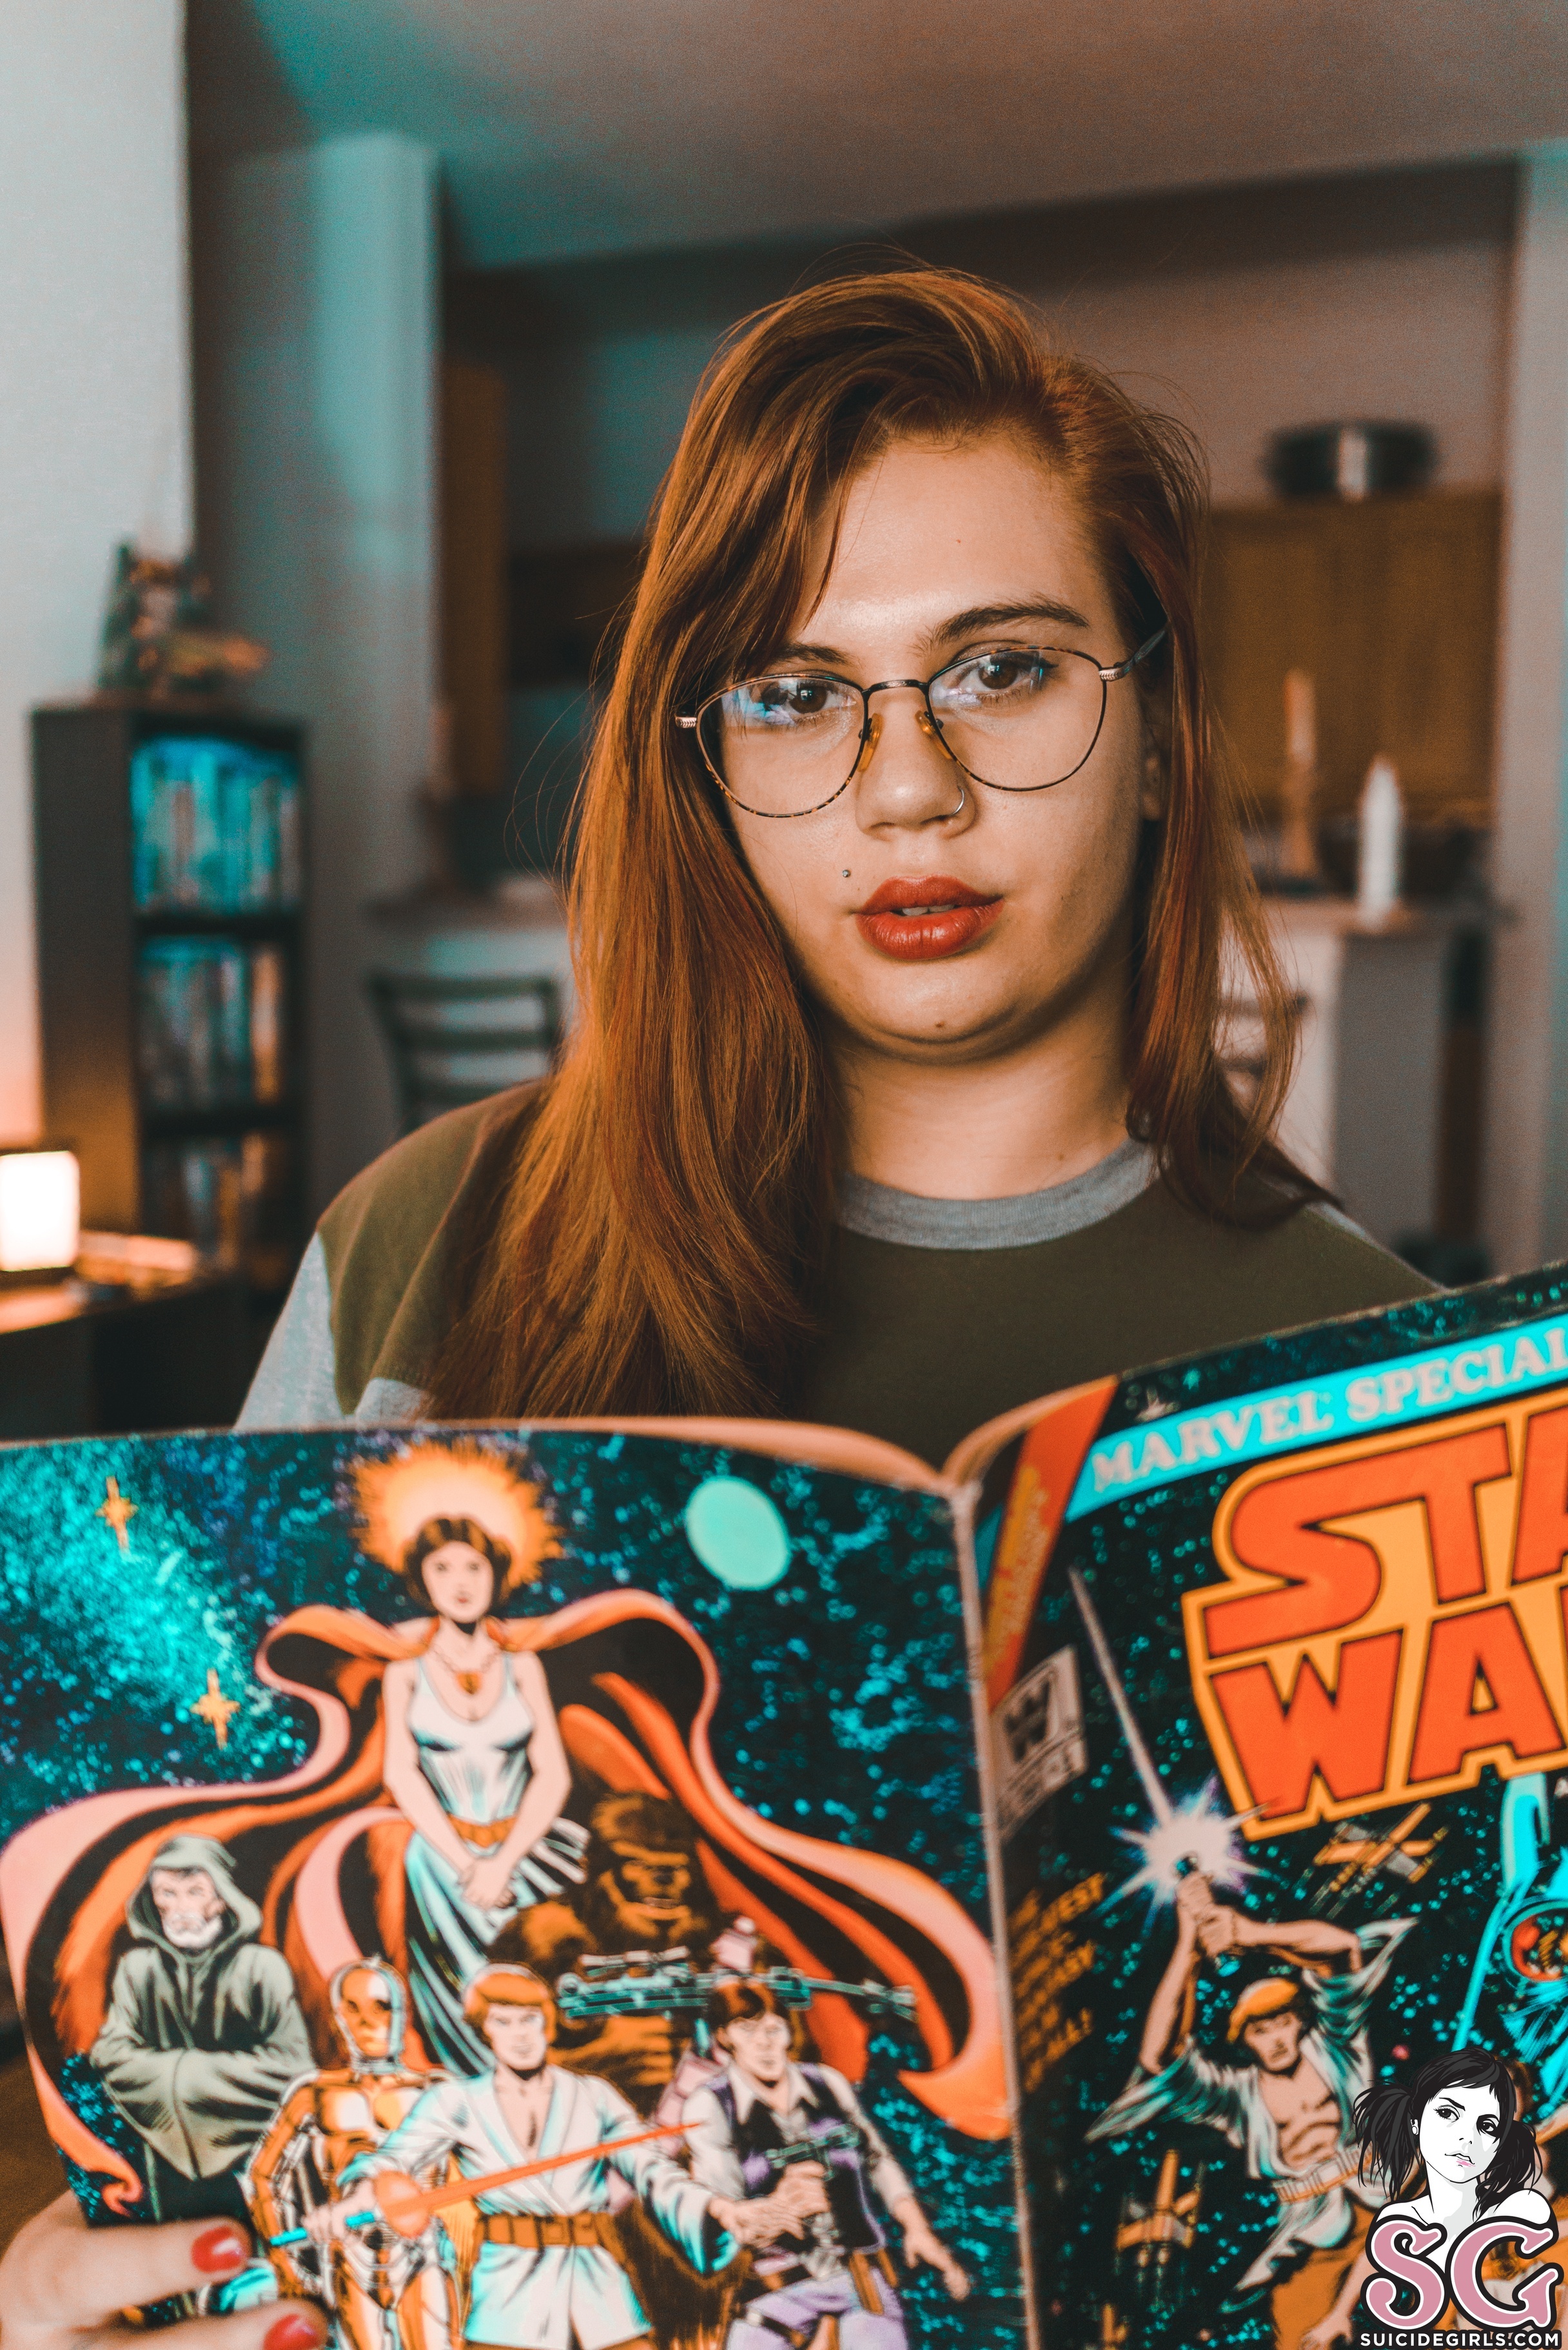 Women Living Rooms Redhead Chubby Magazines Long Hair Glasses Star Wars Nose Rings Women With Glasse 2432x3645